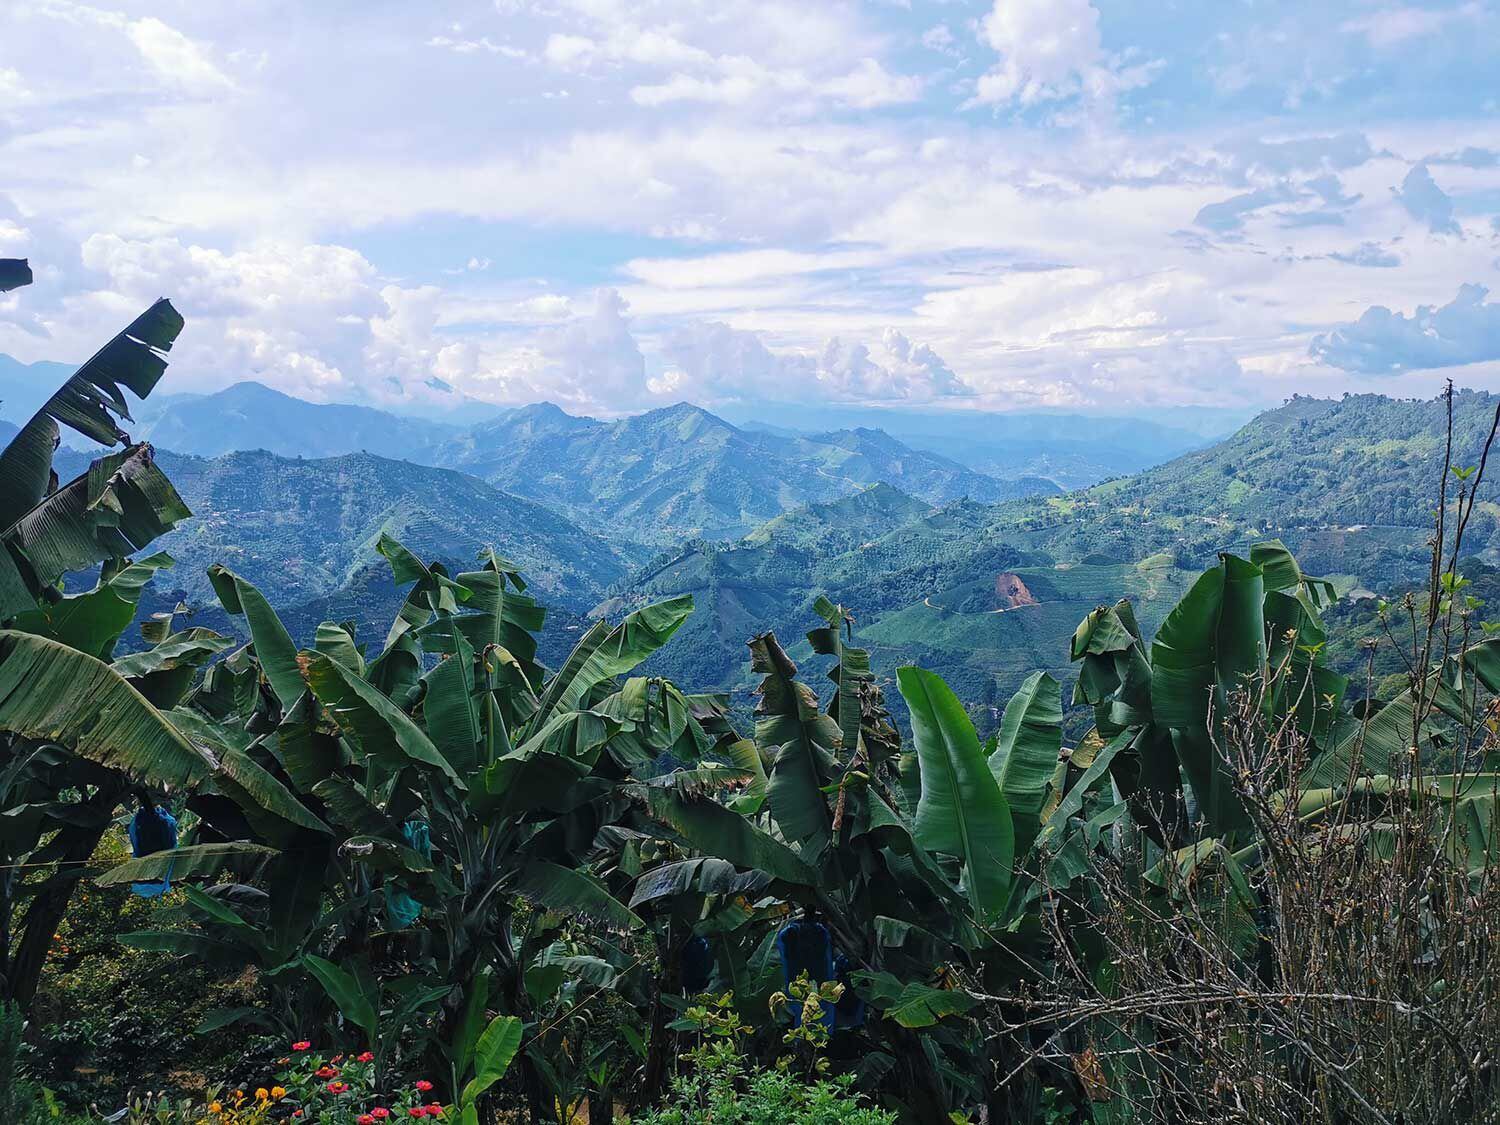 Simultaneously discovering the coffee-growing region in Antioquia, Colombia, and just how deep my reliance on technology runs.